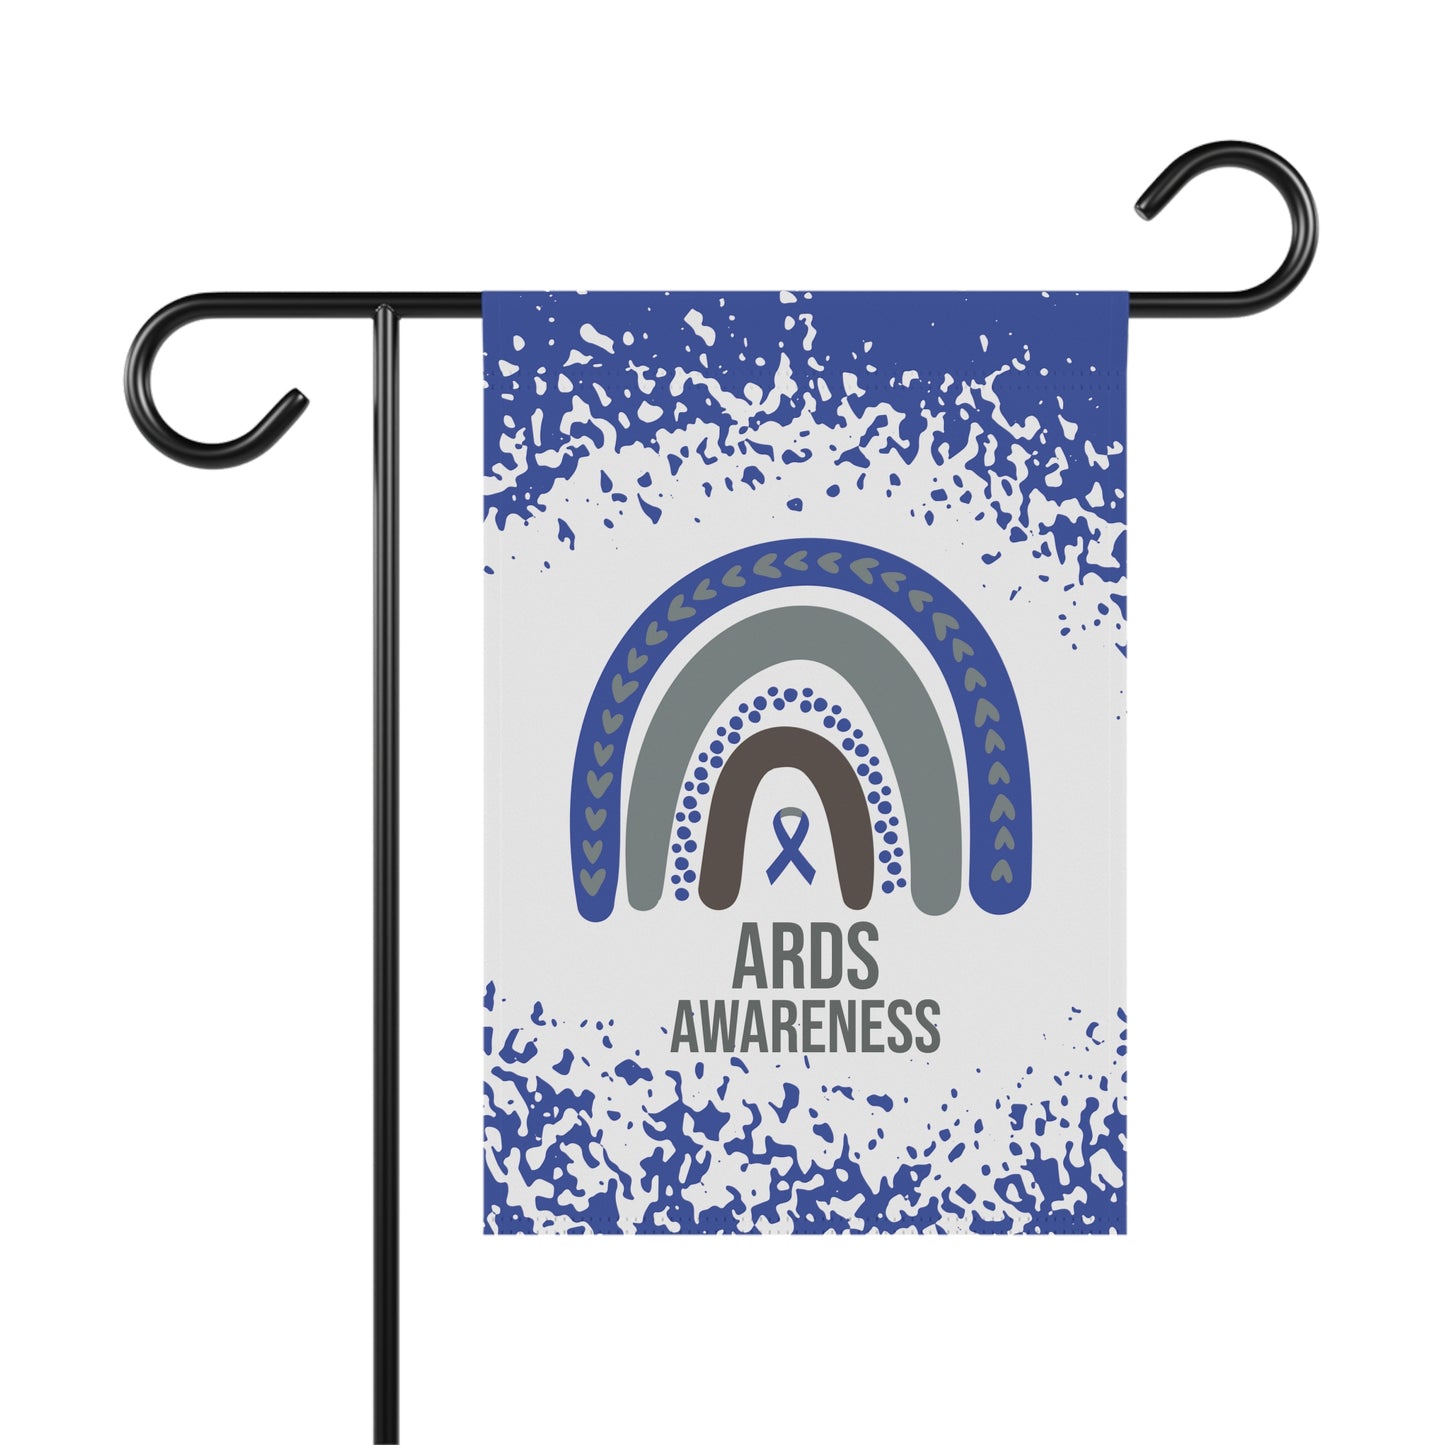 ARDS Awareness Garden Flag | Welcome Sign | New Home | Decorative House Banner | Blue Ribbon | Acute Respiratory Distress Syndrome